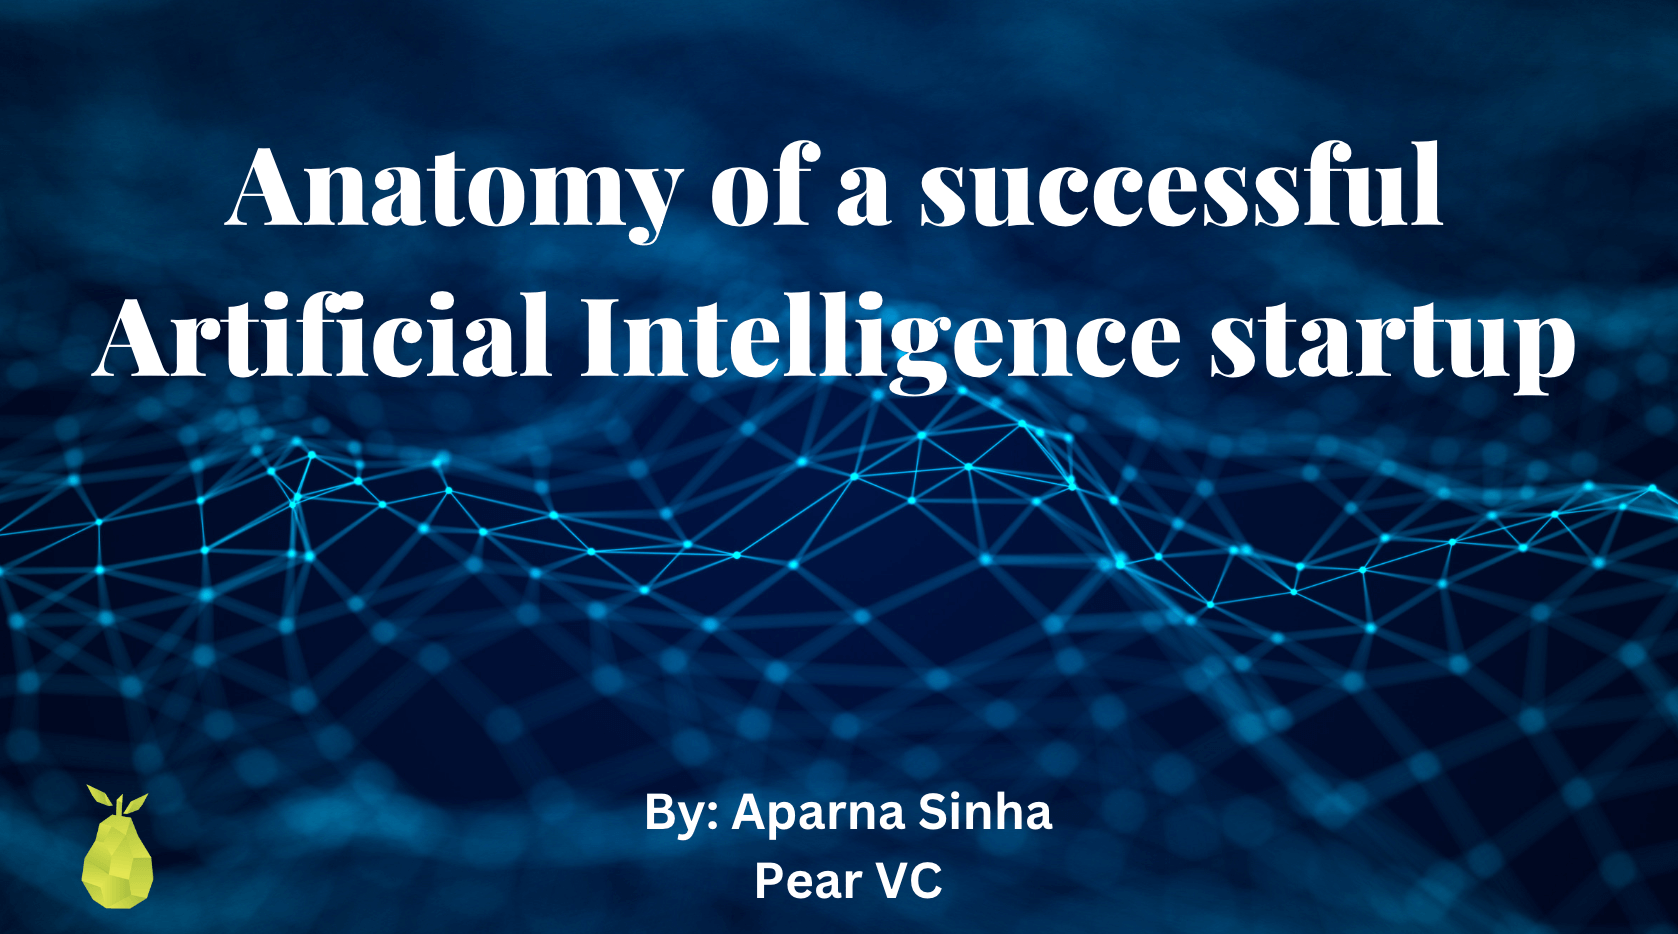 Anatomy of a successful Artificial Intelligence startup